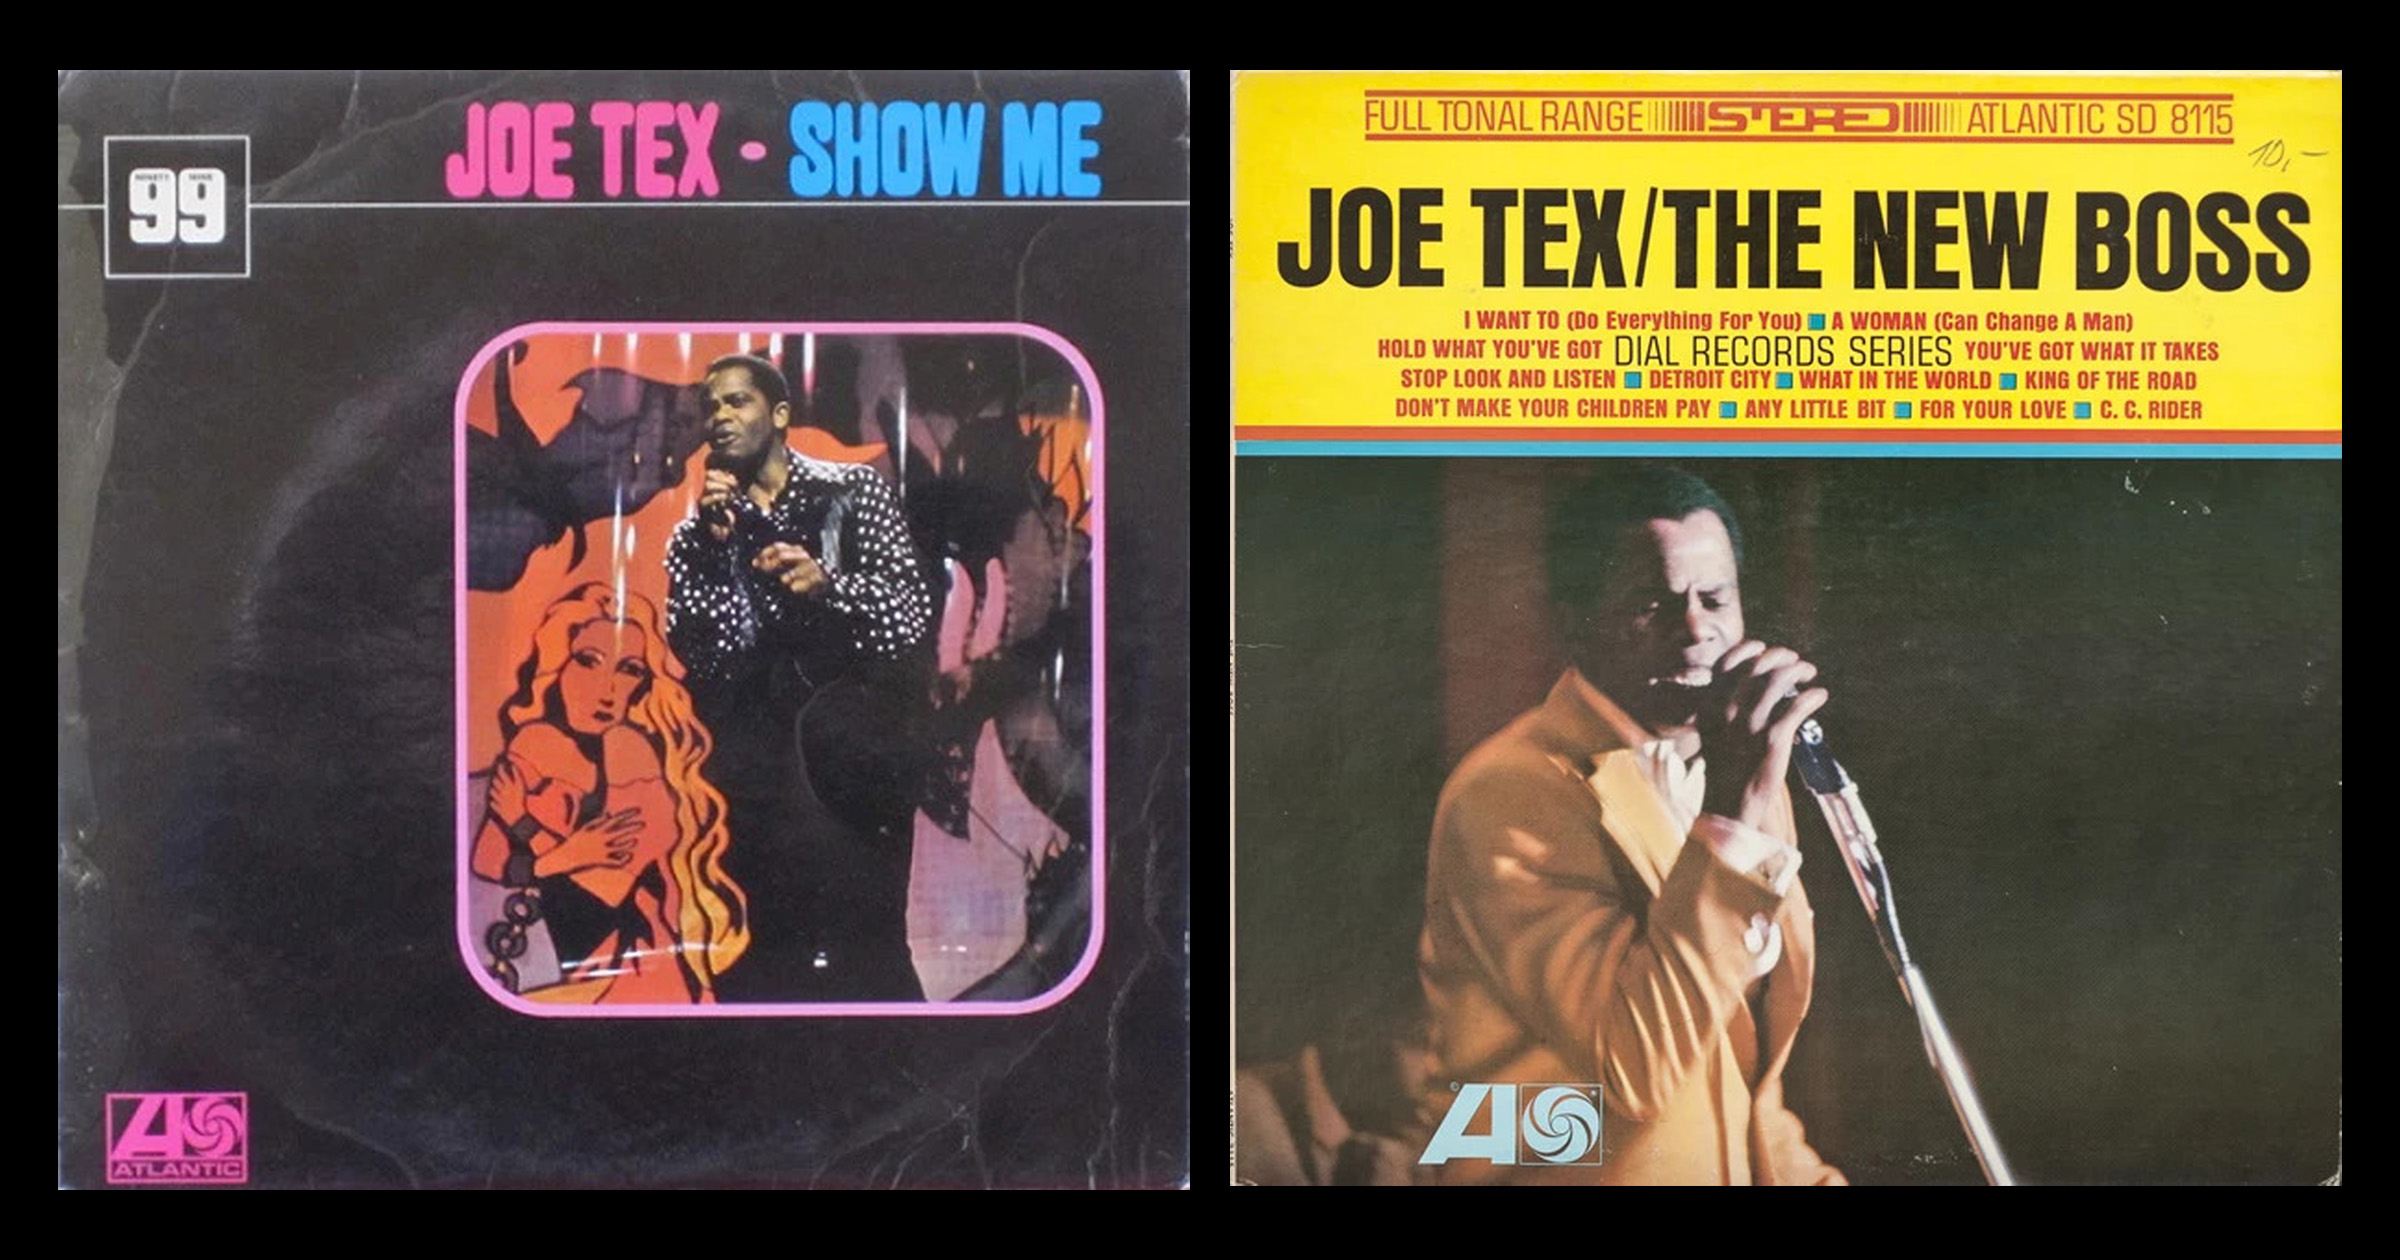 Two brightly covered album covers, one labeled "Show Me" and the other "Joe Tex/The New Boss" featuring Joe Tex singing on both